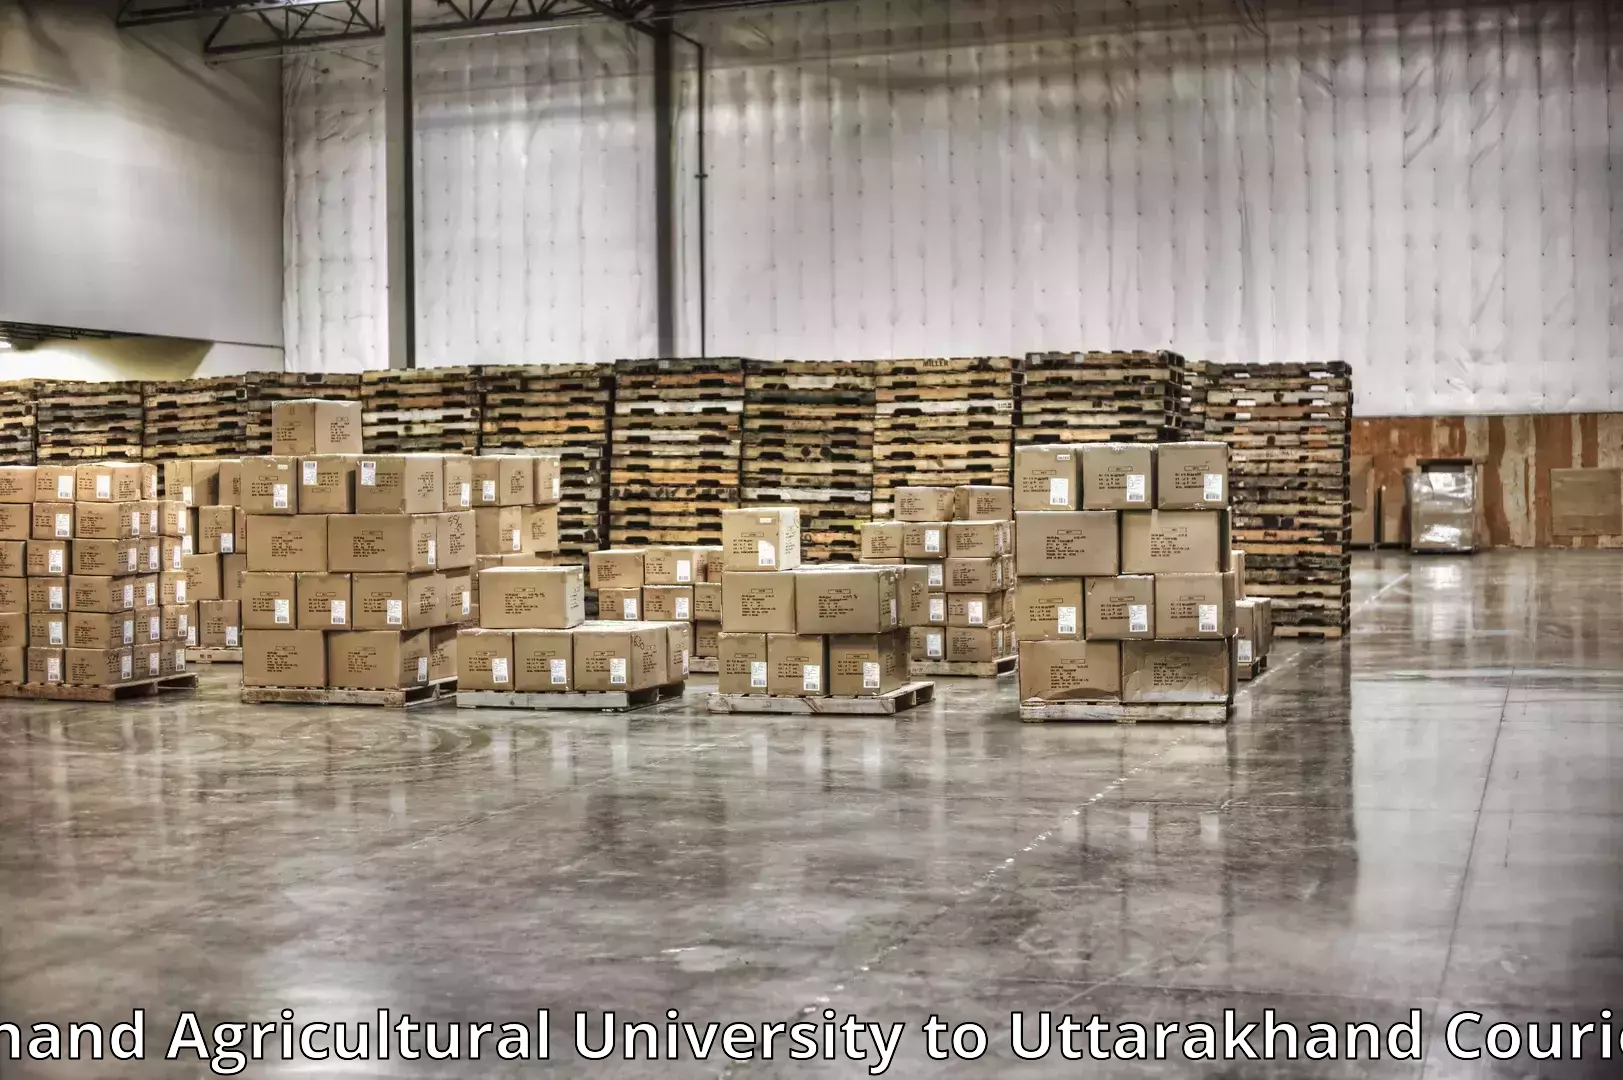 Long-distance moving services Anand Agricultural University to Uttarakhand